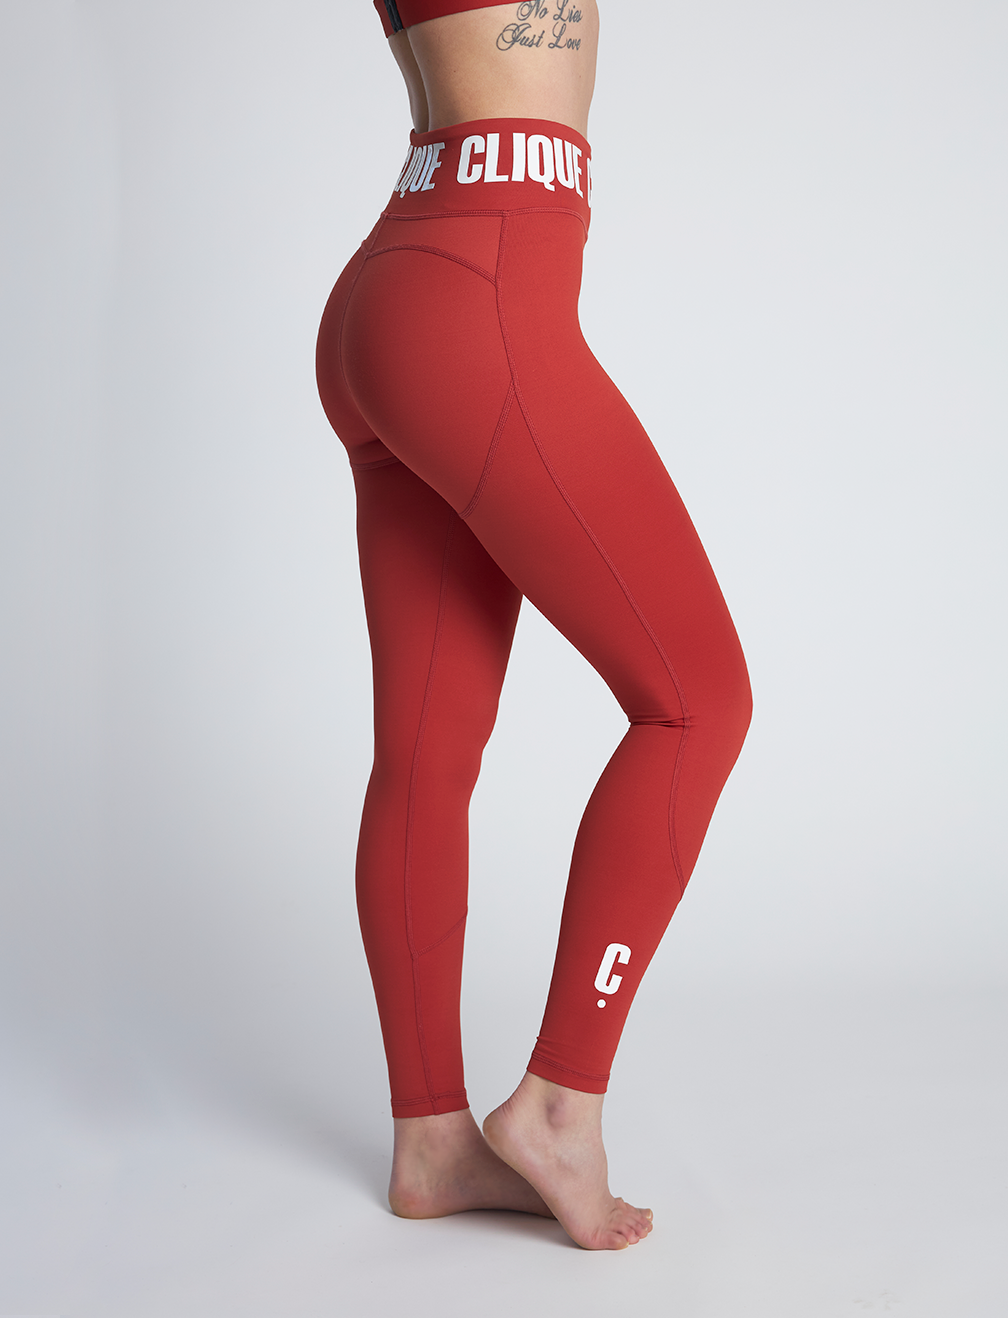 Limited Edition CLAY Compression Tights - Tall